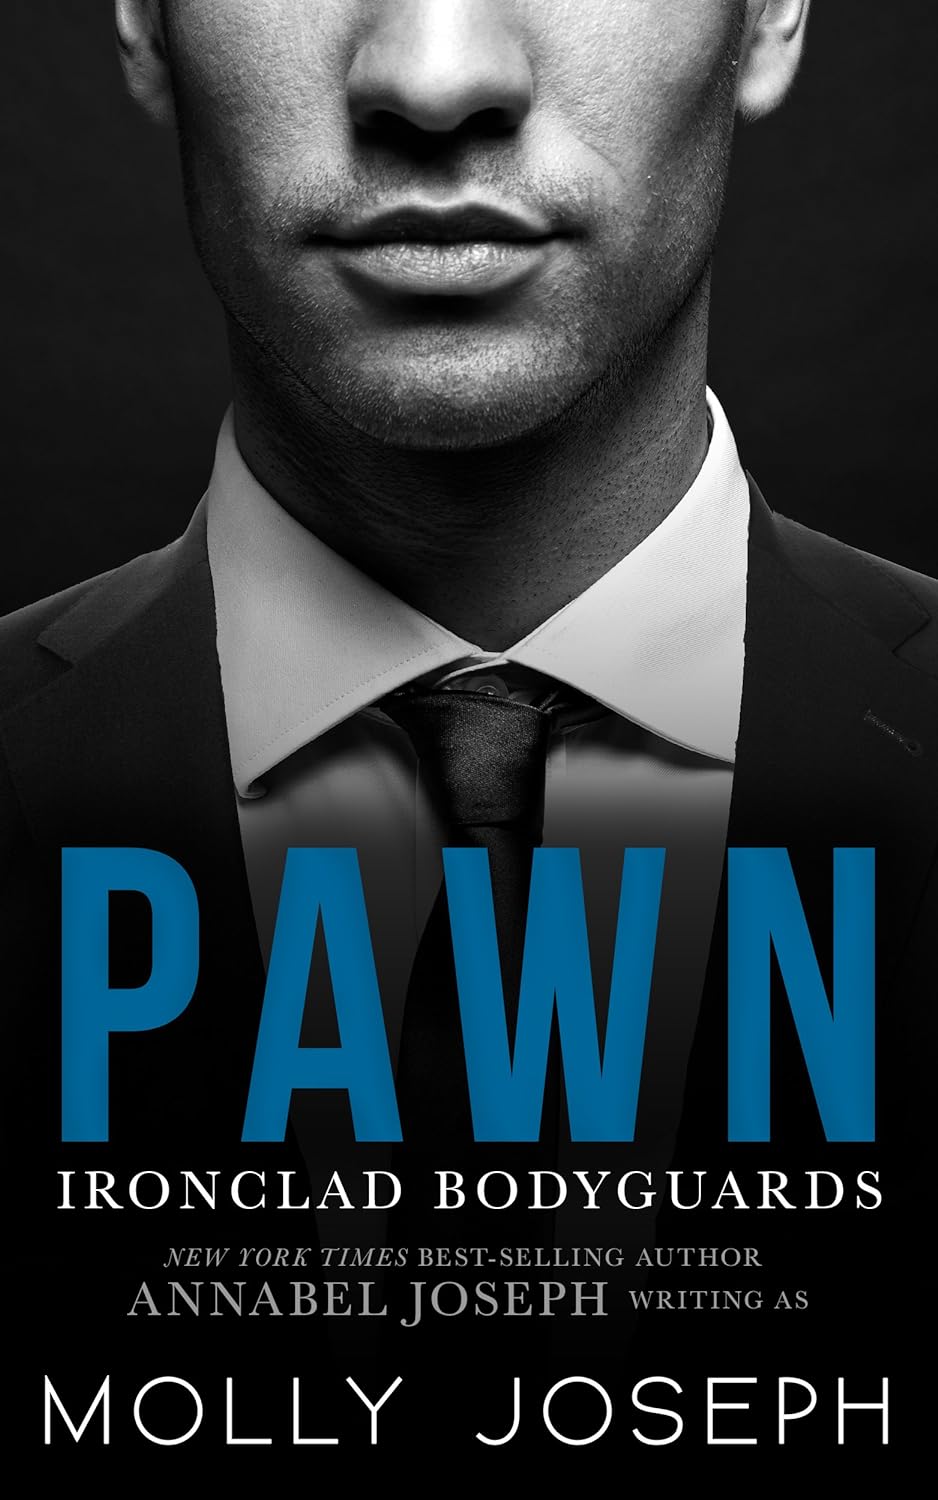 Pawn (Ironclad Bodyguards Book 1)